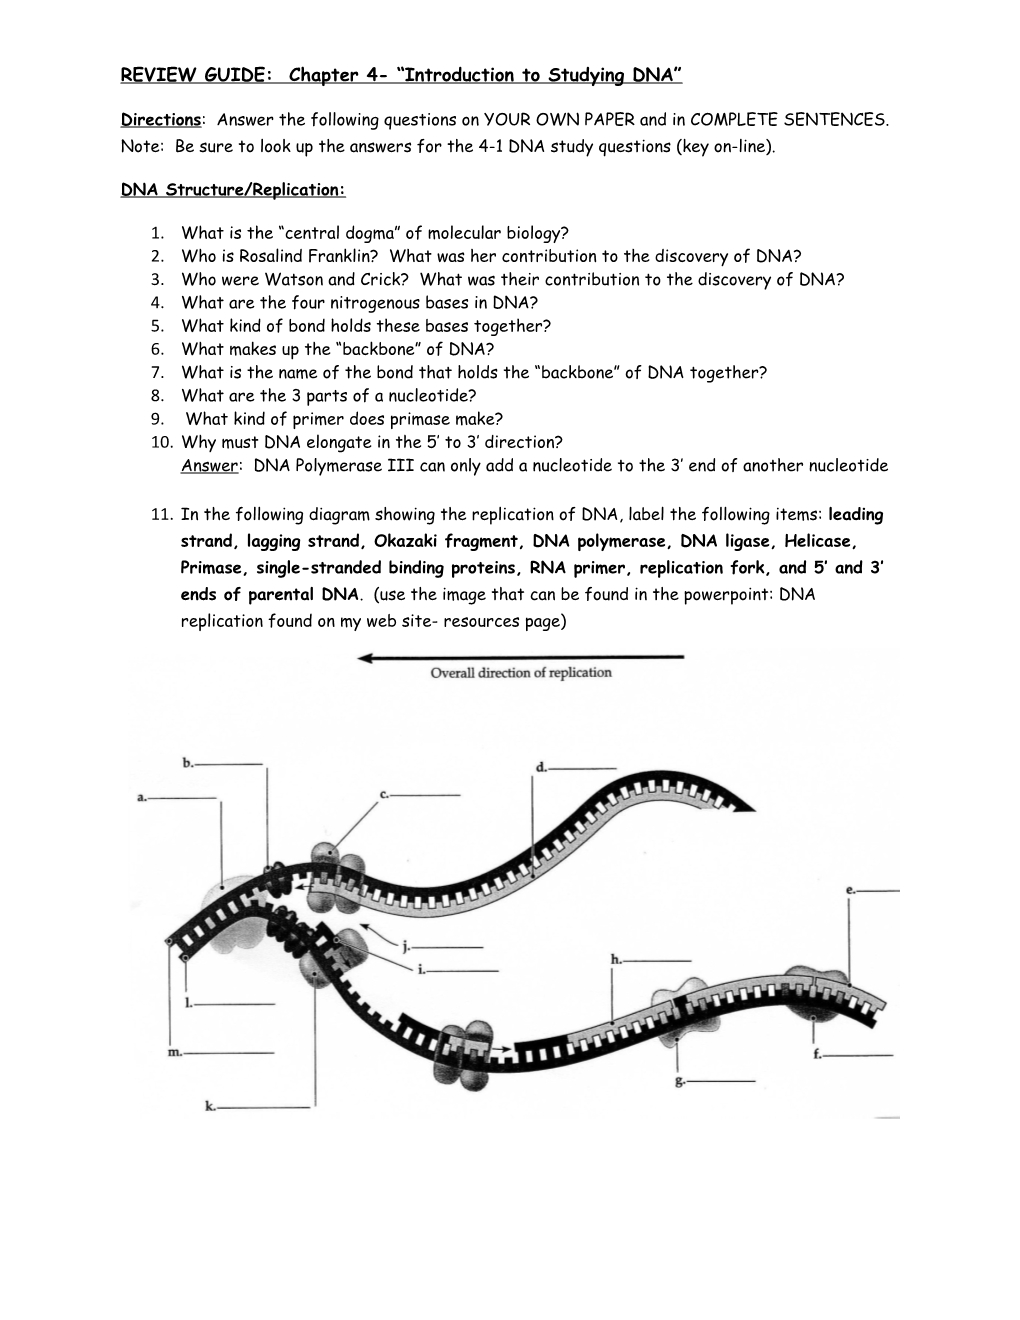 REVIEW GUIDE: Chapter 4- Introduction to Studying DNA